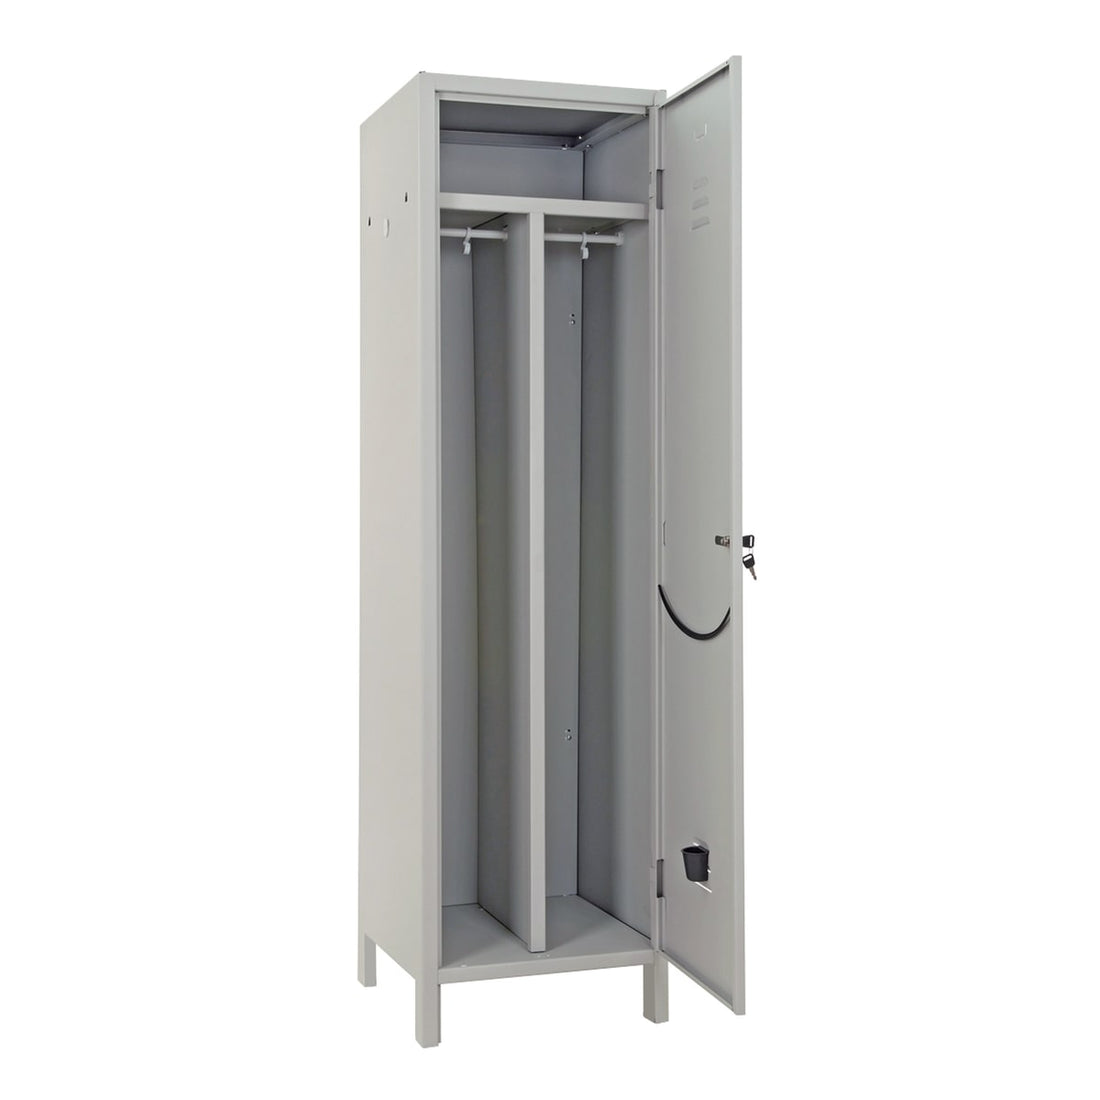 CLEAN CLEANED W50xD50xH179CM METAL DISPLAY CABINET GREY COLOUR